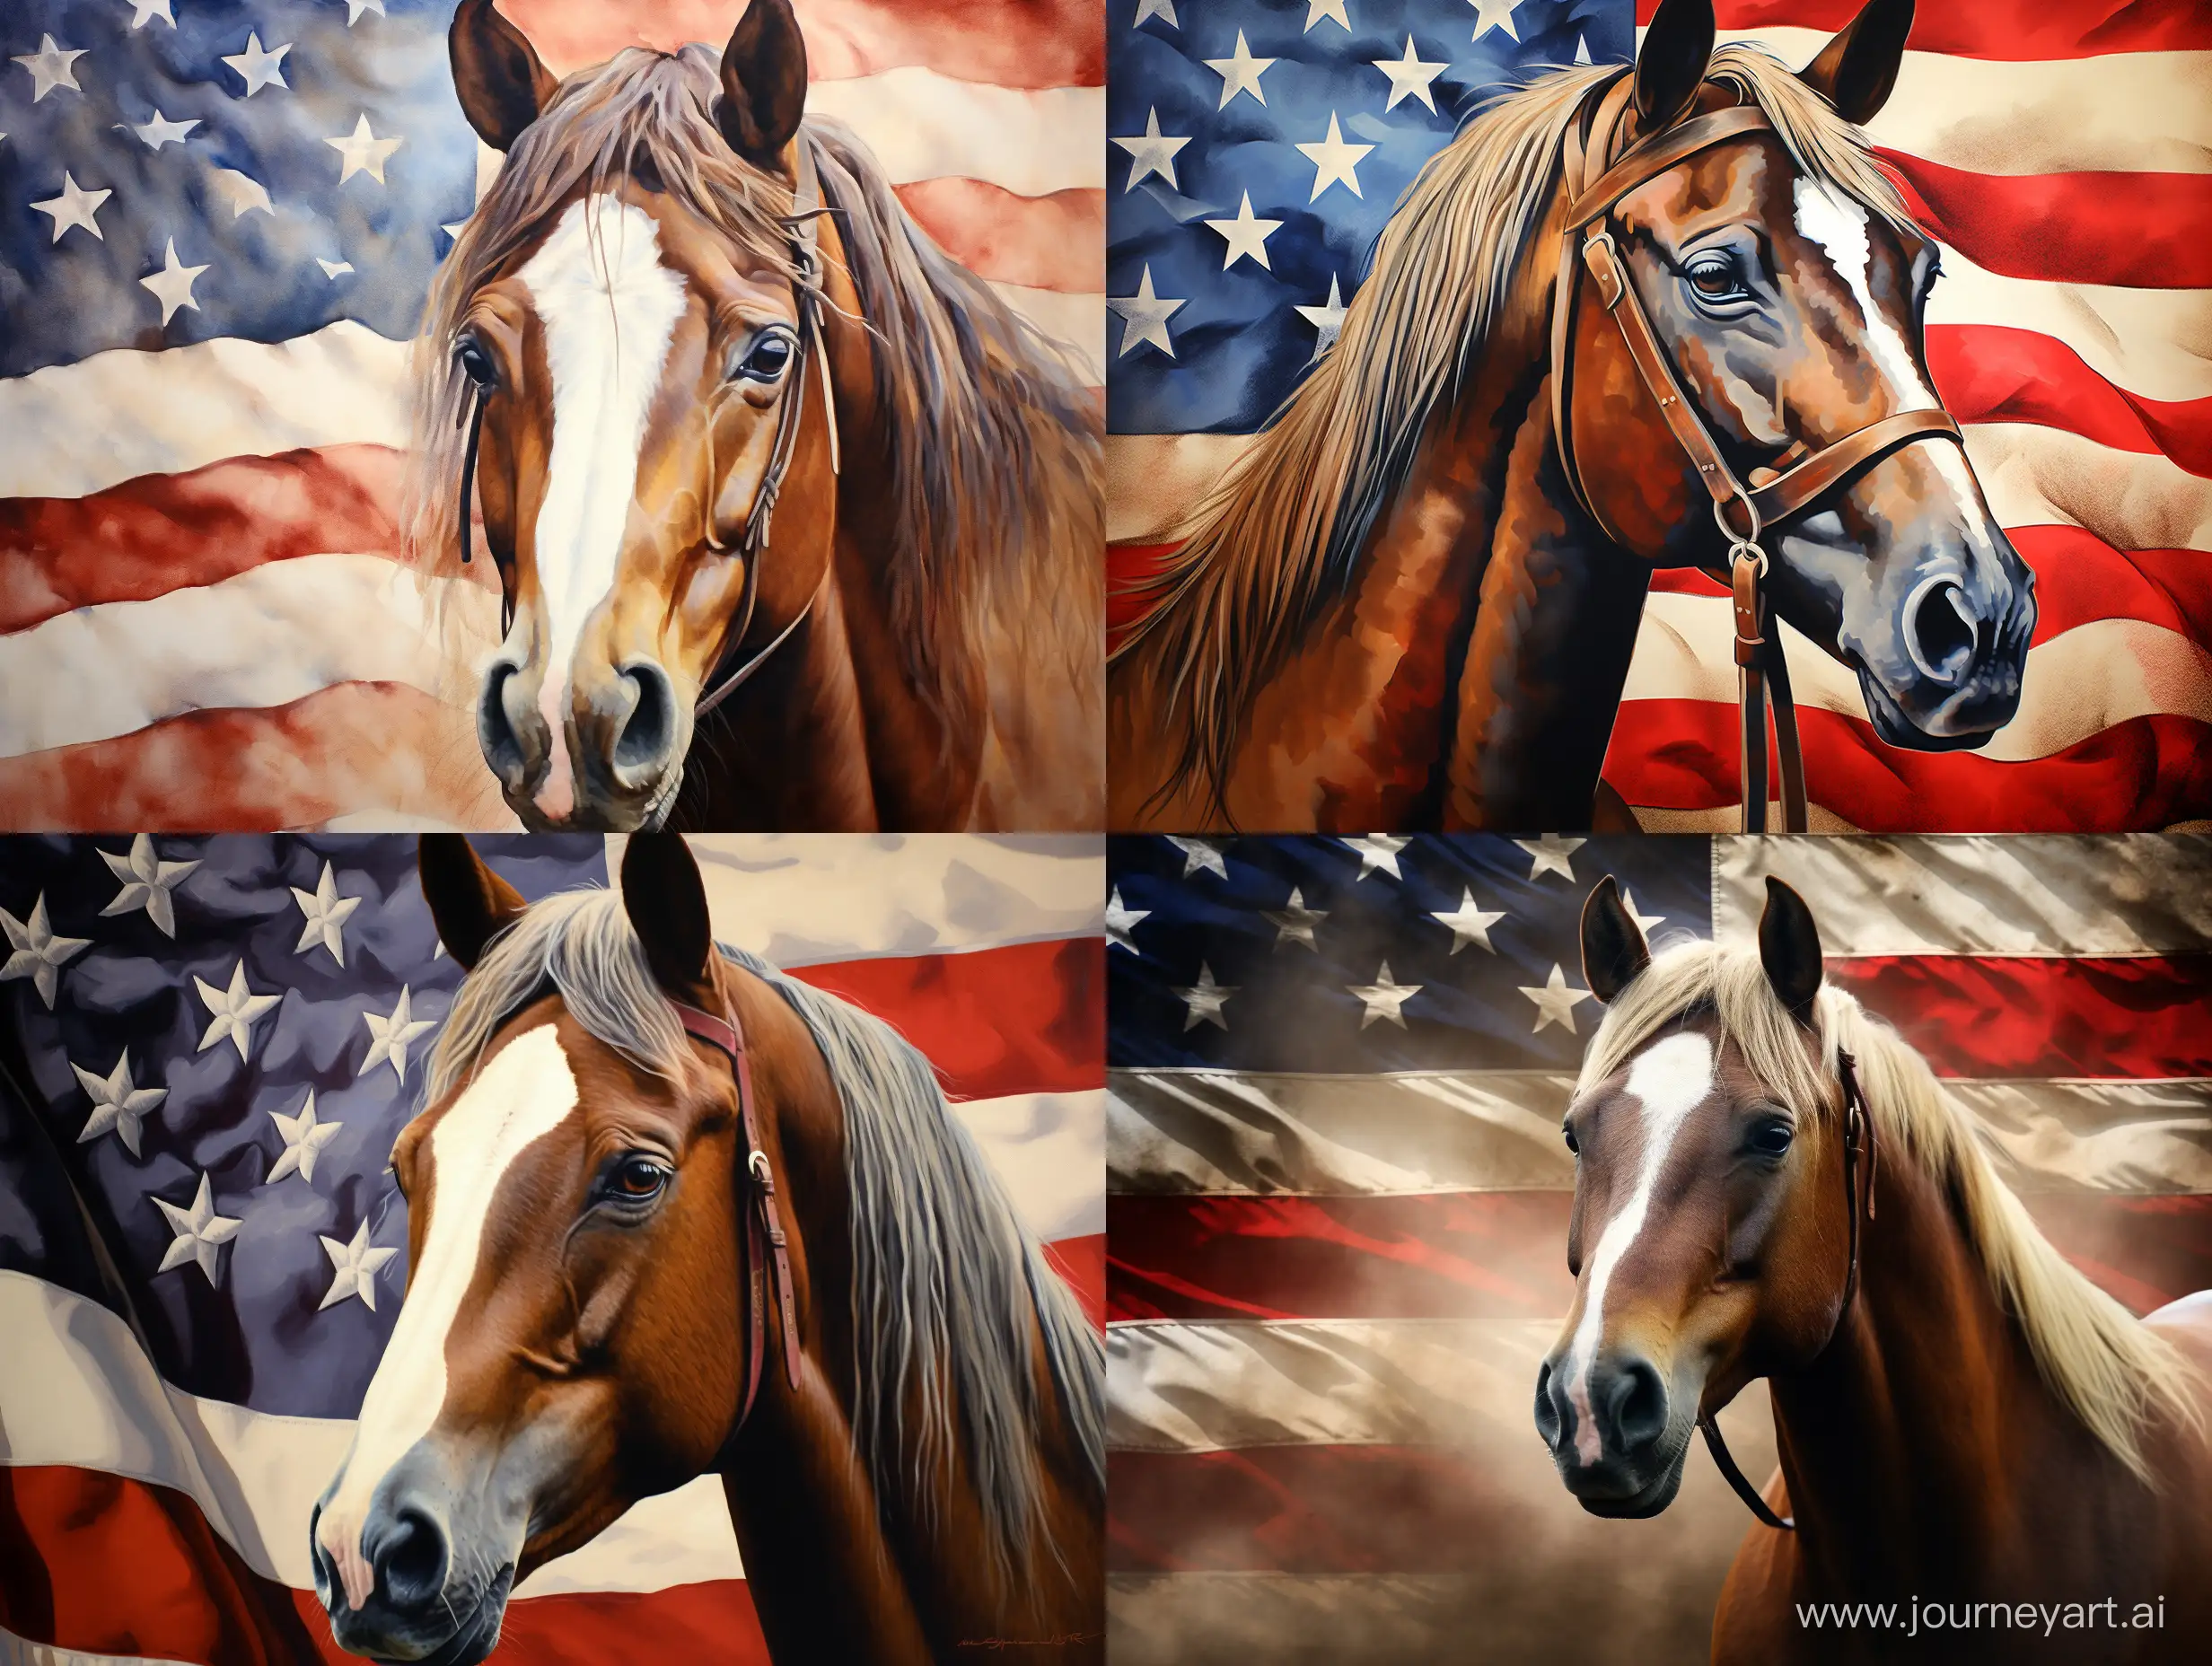 A patriotic horse in front of the America flag